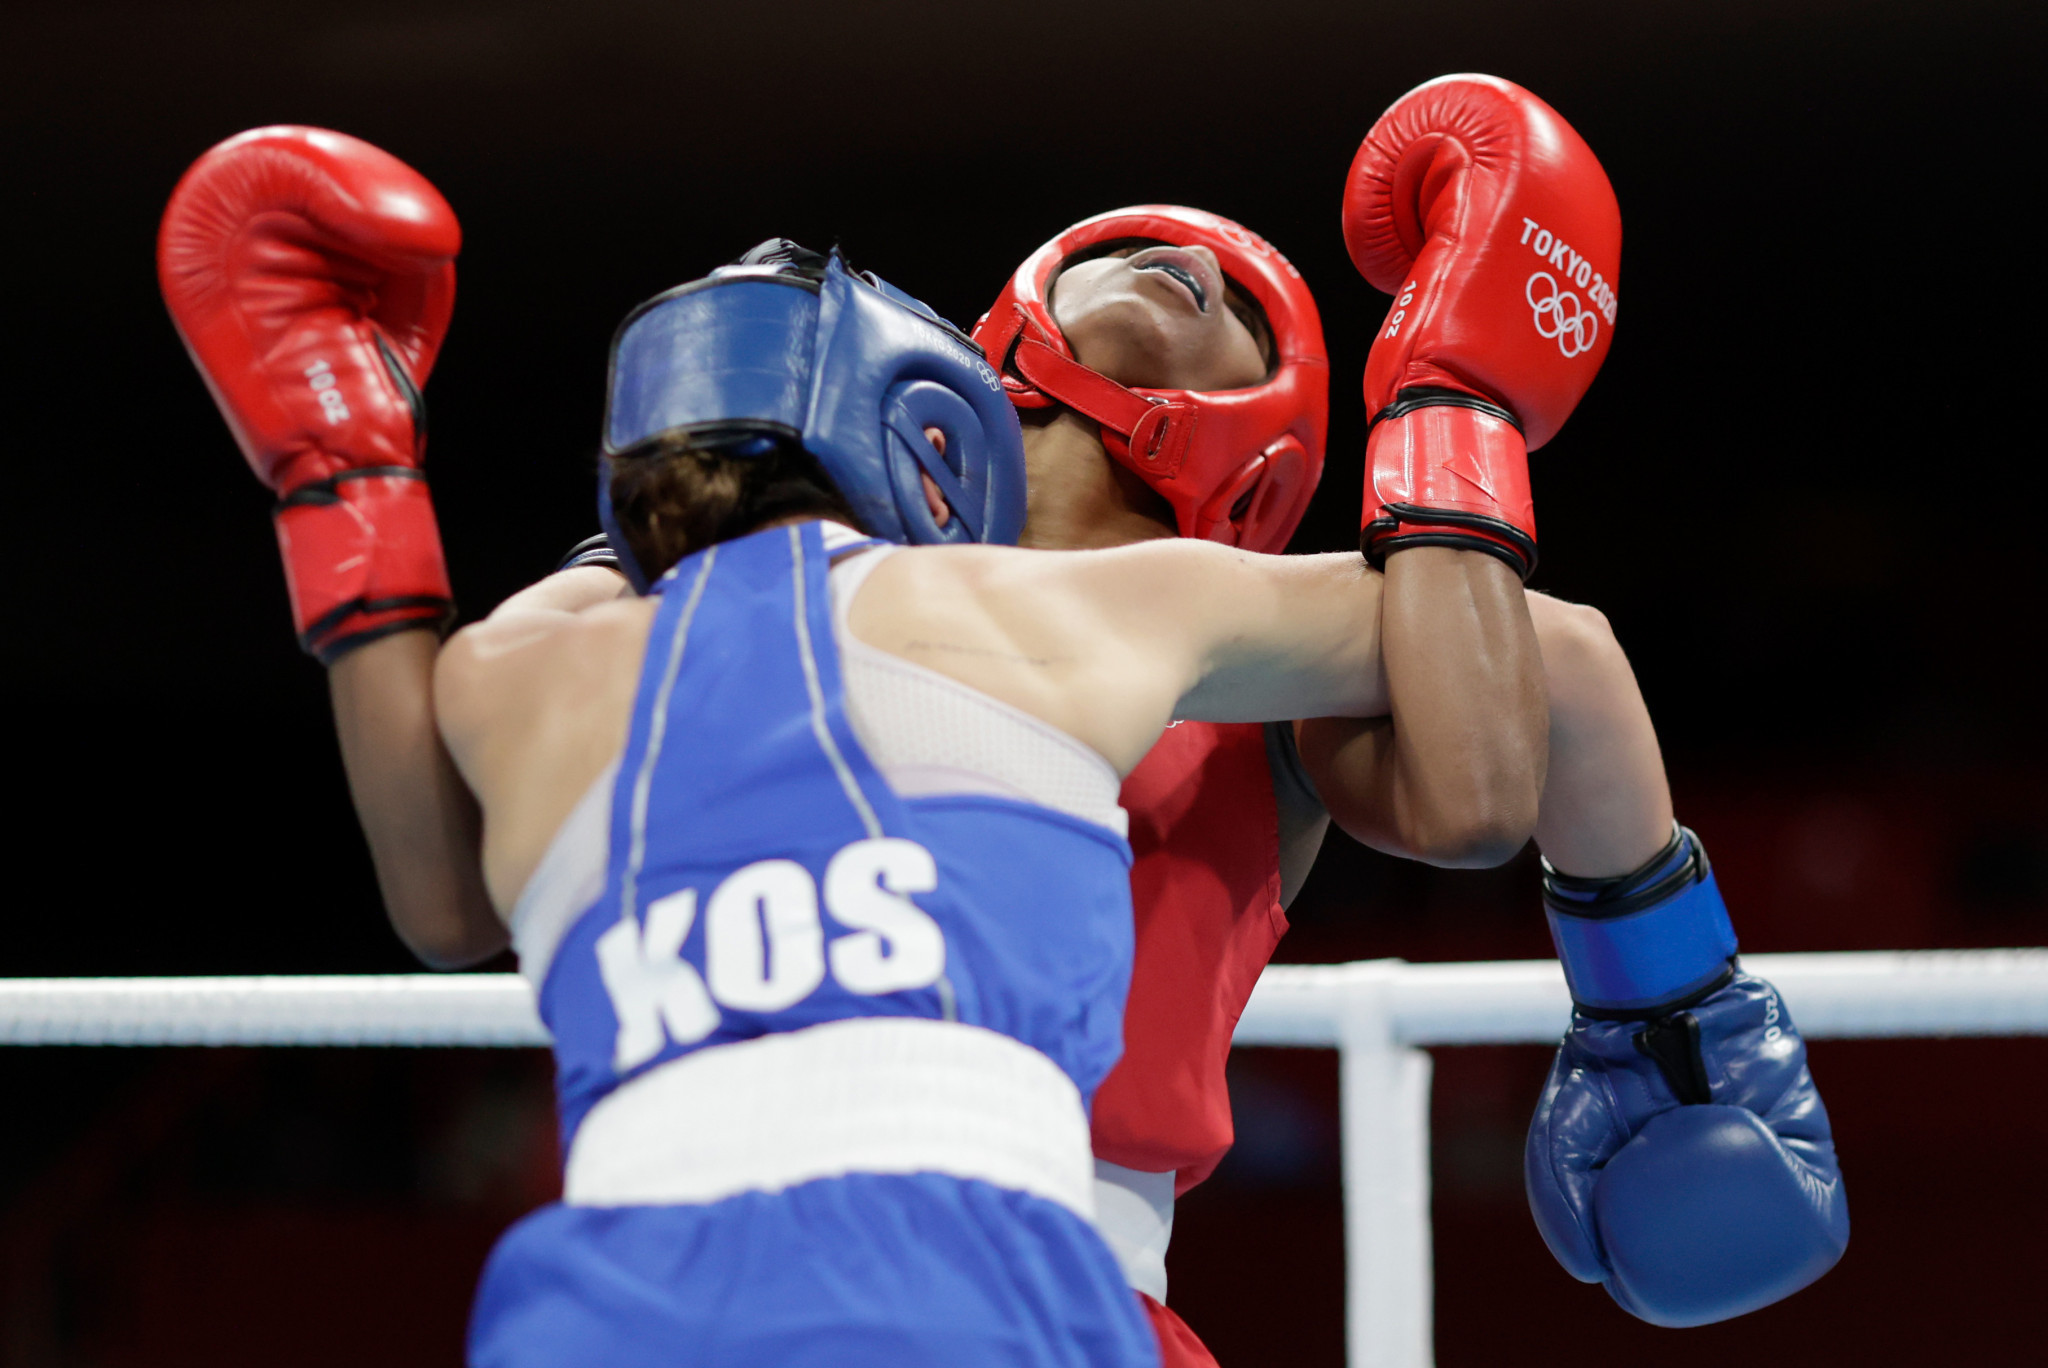 Kosovo has been denied visas for the IBA Men's World Boxing Championships in Uzbekistan ©Getty Images